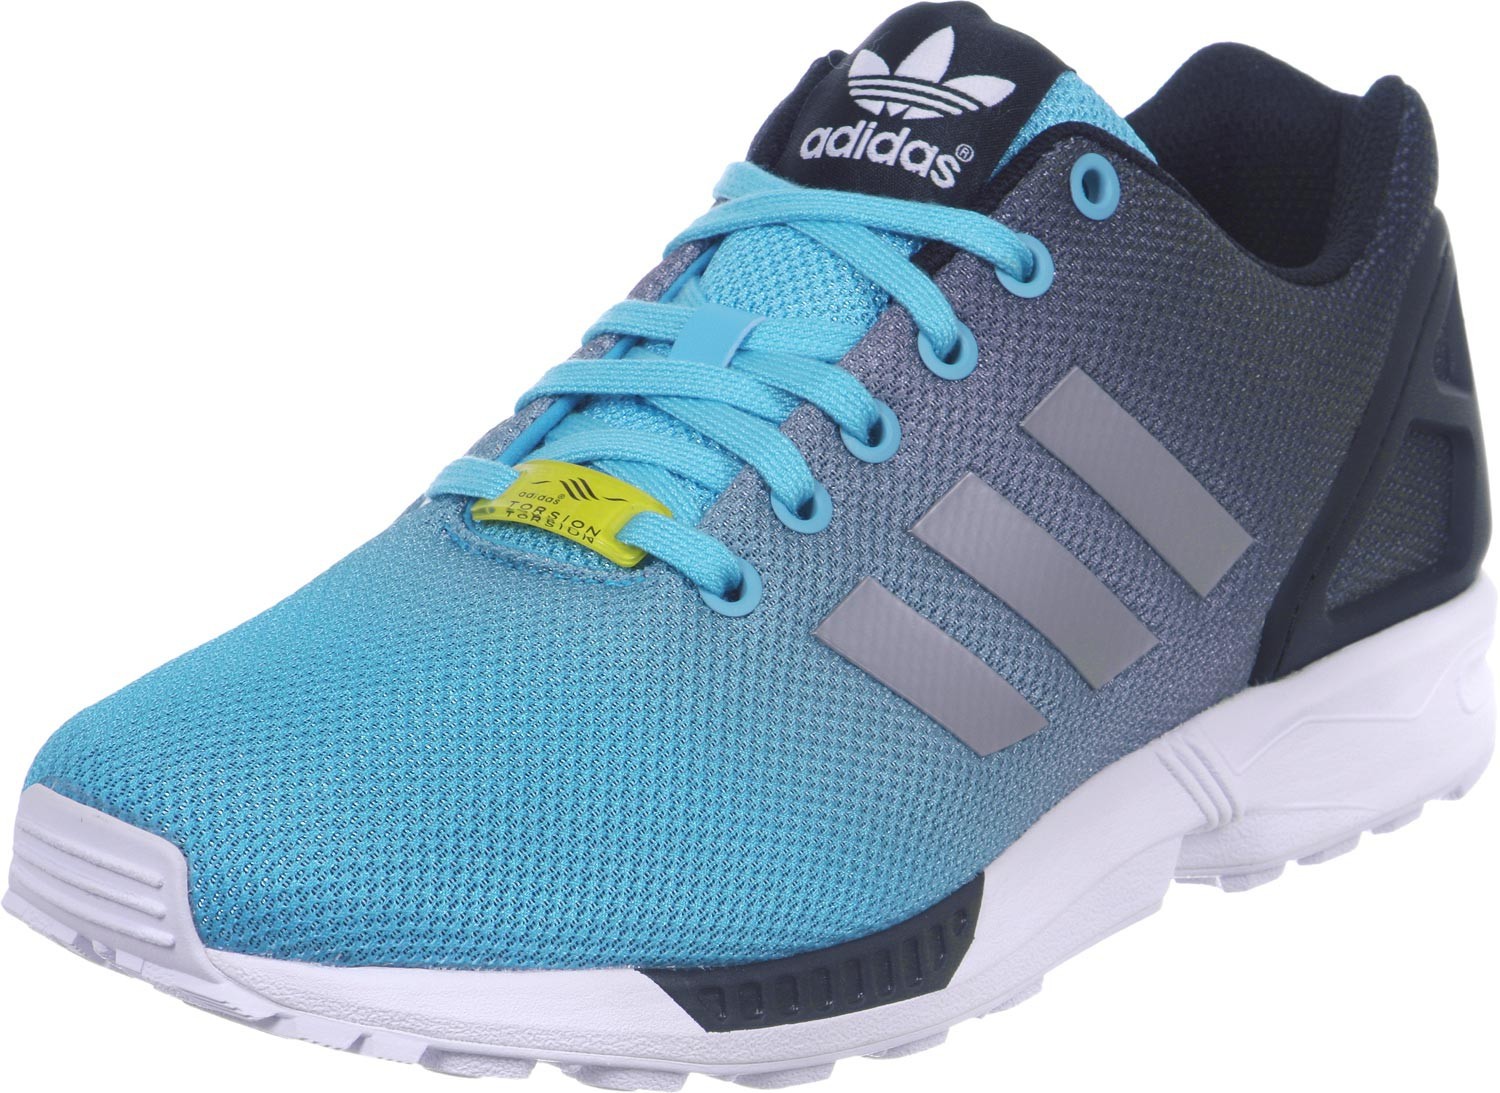 adidas zx flux bleu clair Off 57% - www.bashhguidelines.org